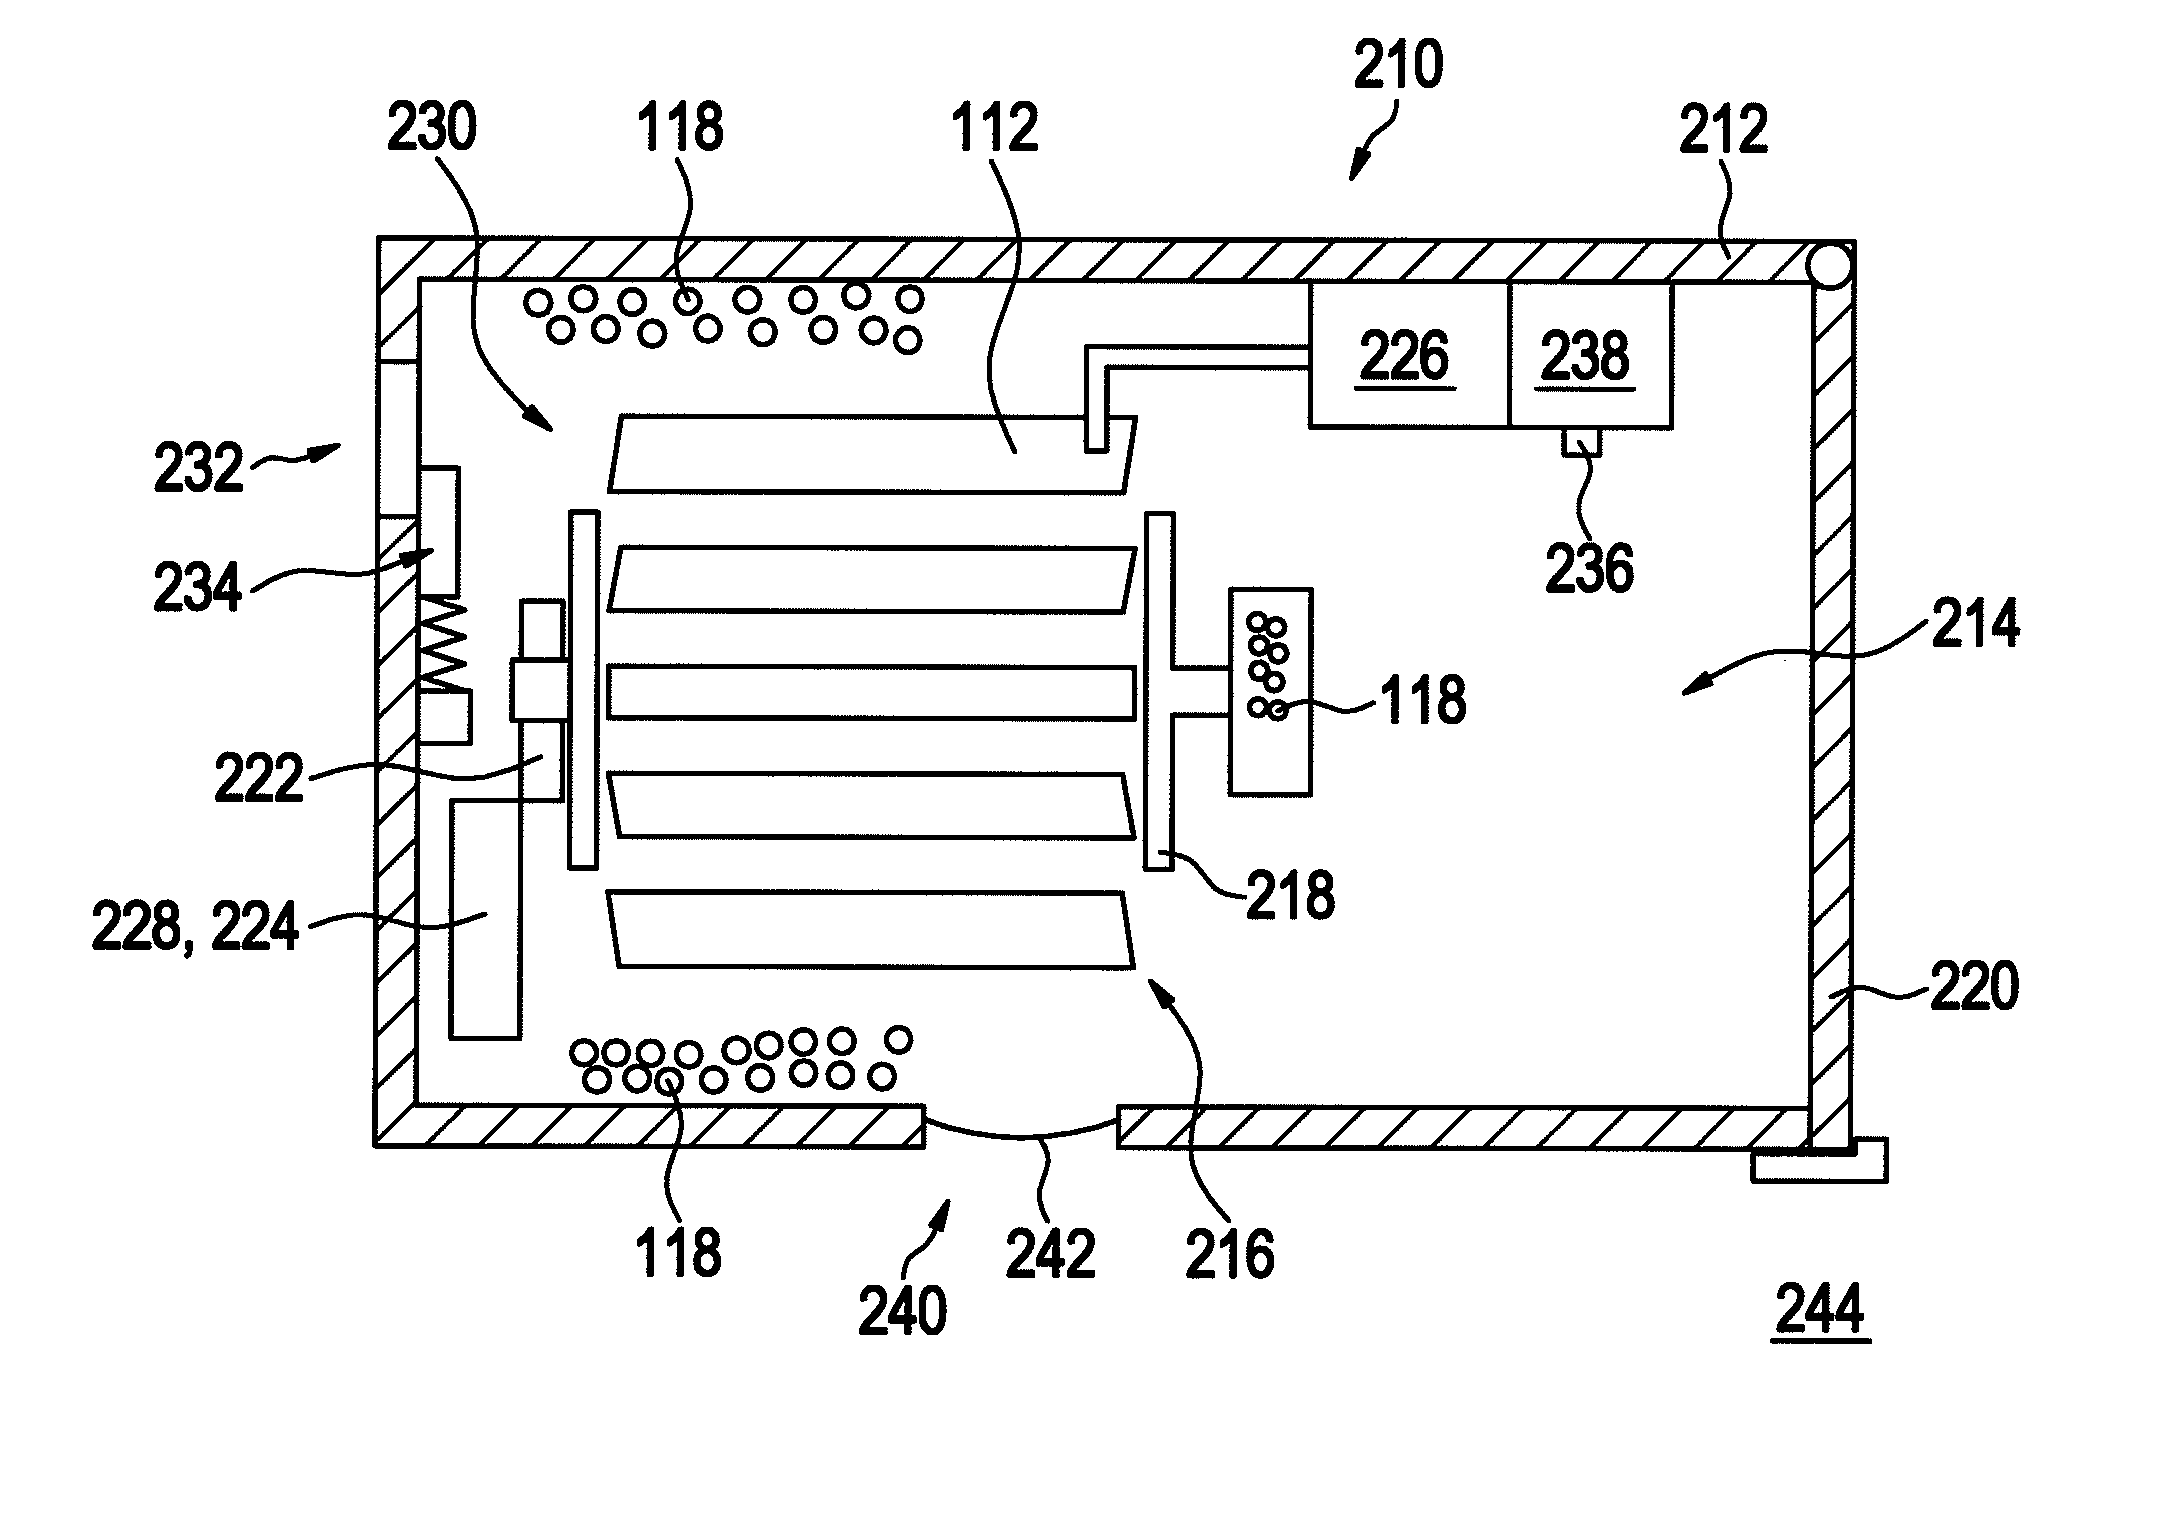 Portable measuring system having an optimized assembly space